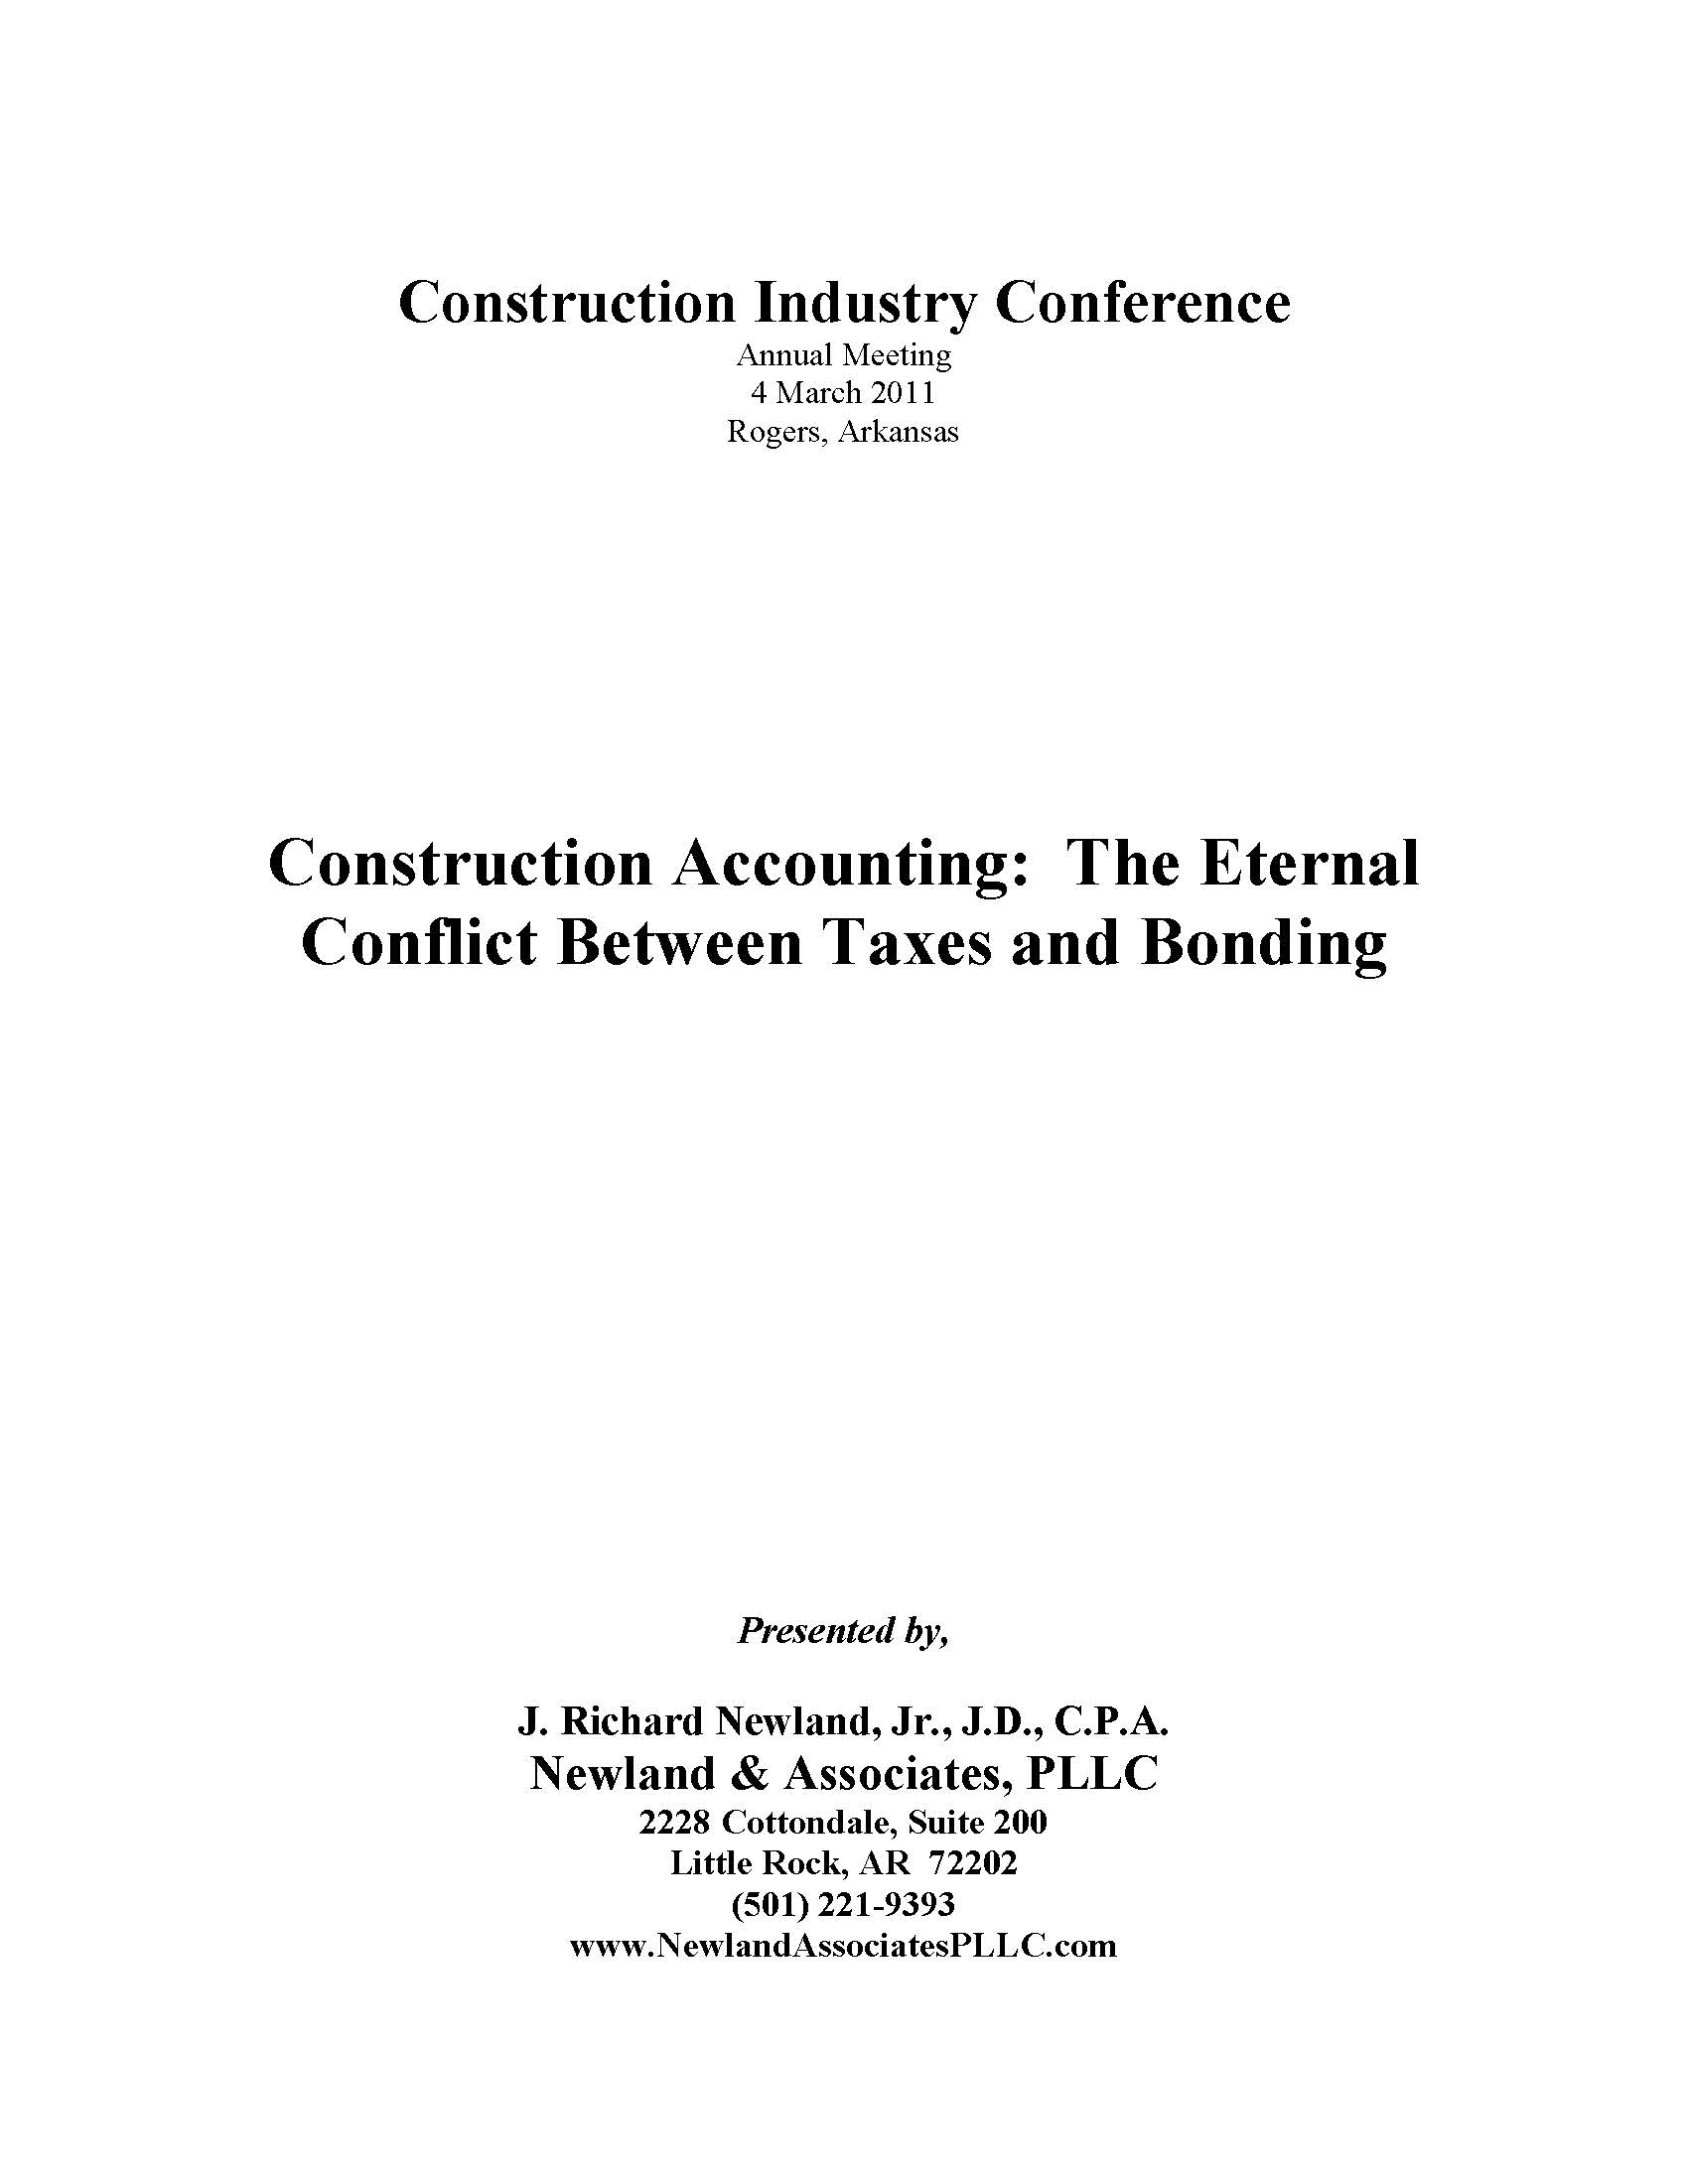 CONSTRUCTION ACCOUNTING